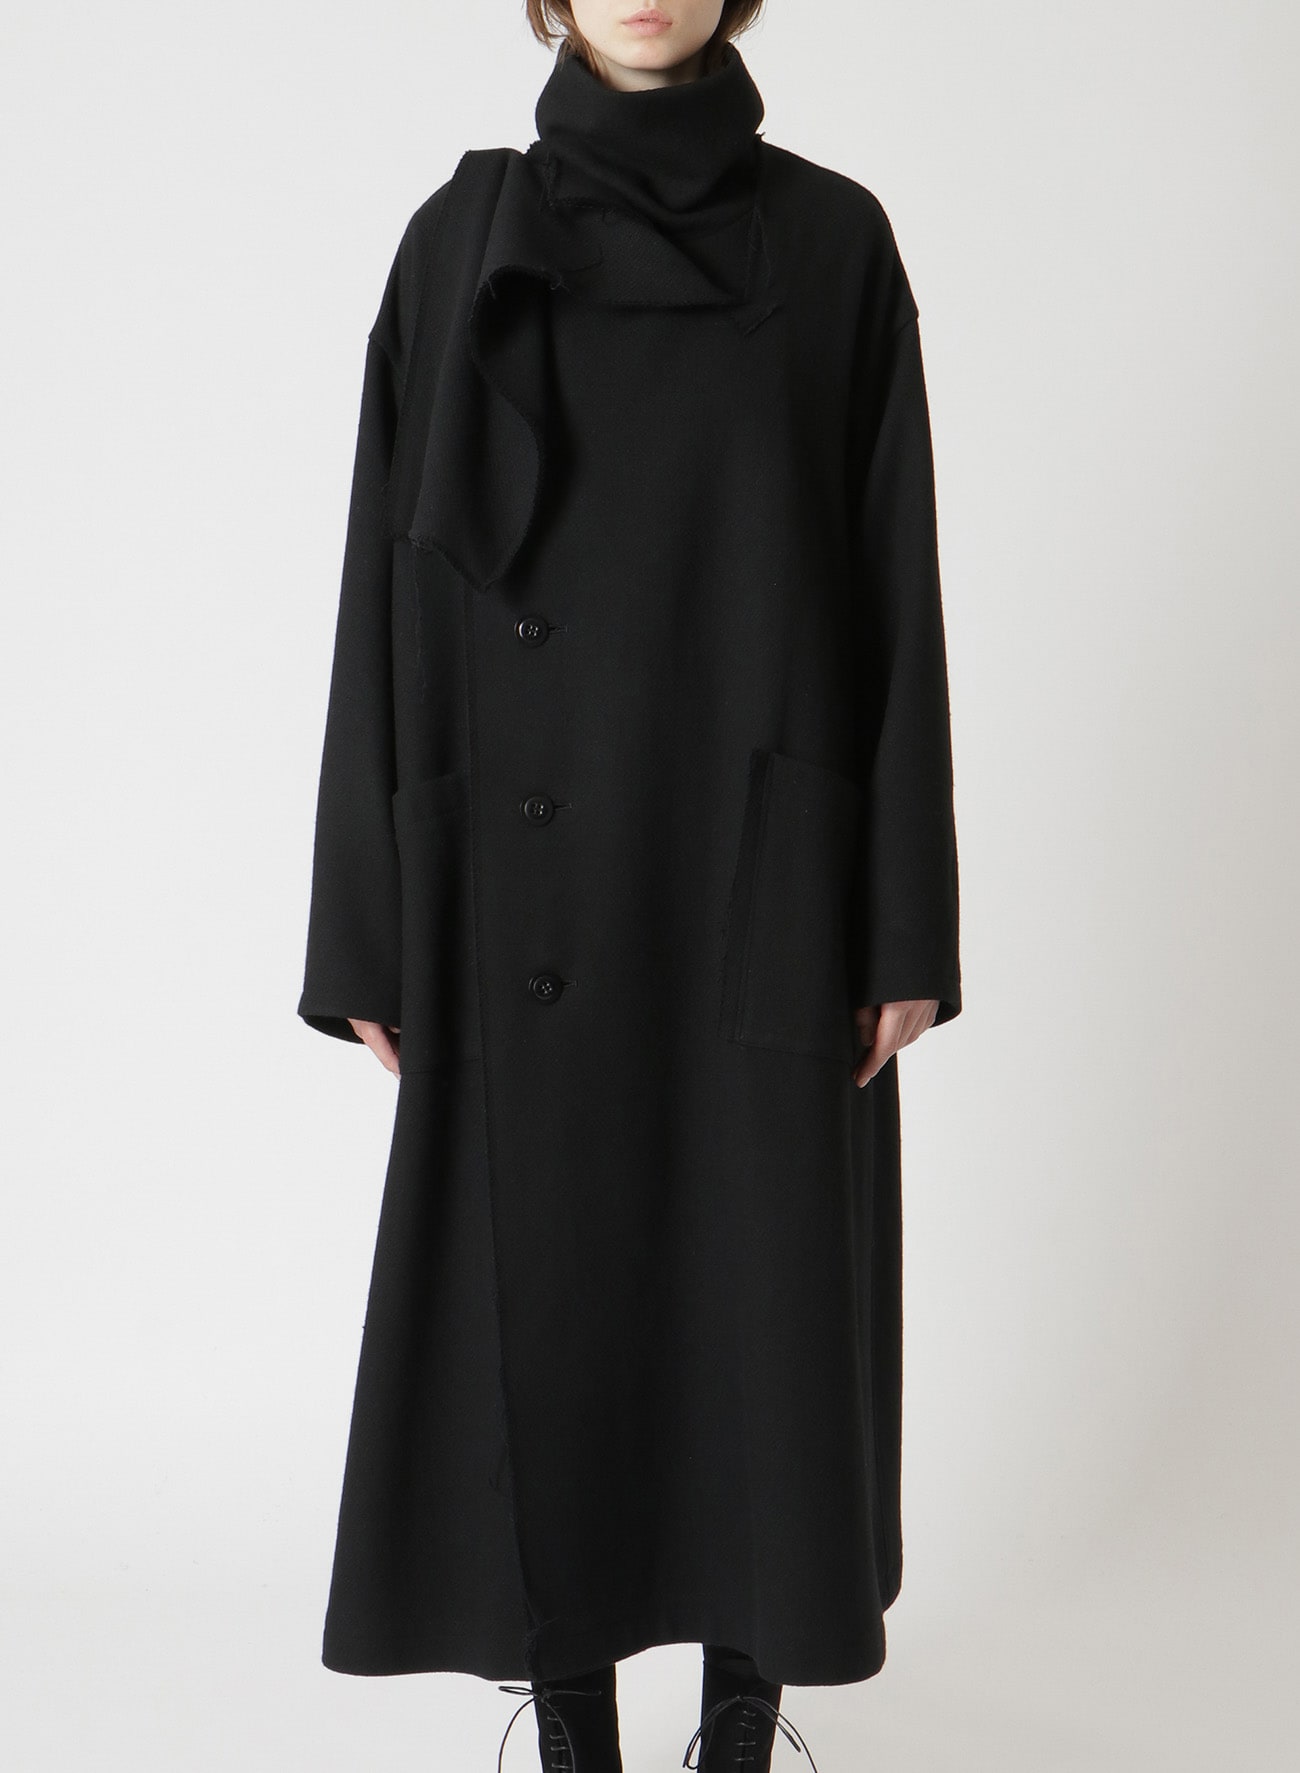 WOOL BLEND MELTON FOLD-OVER COLLAR COAT(XS Black): Y's｜THE SHOP